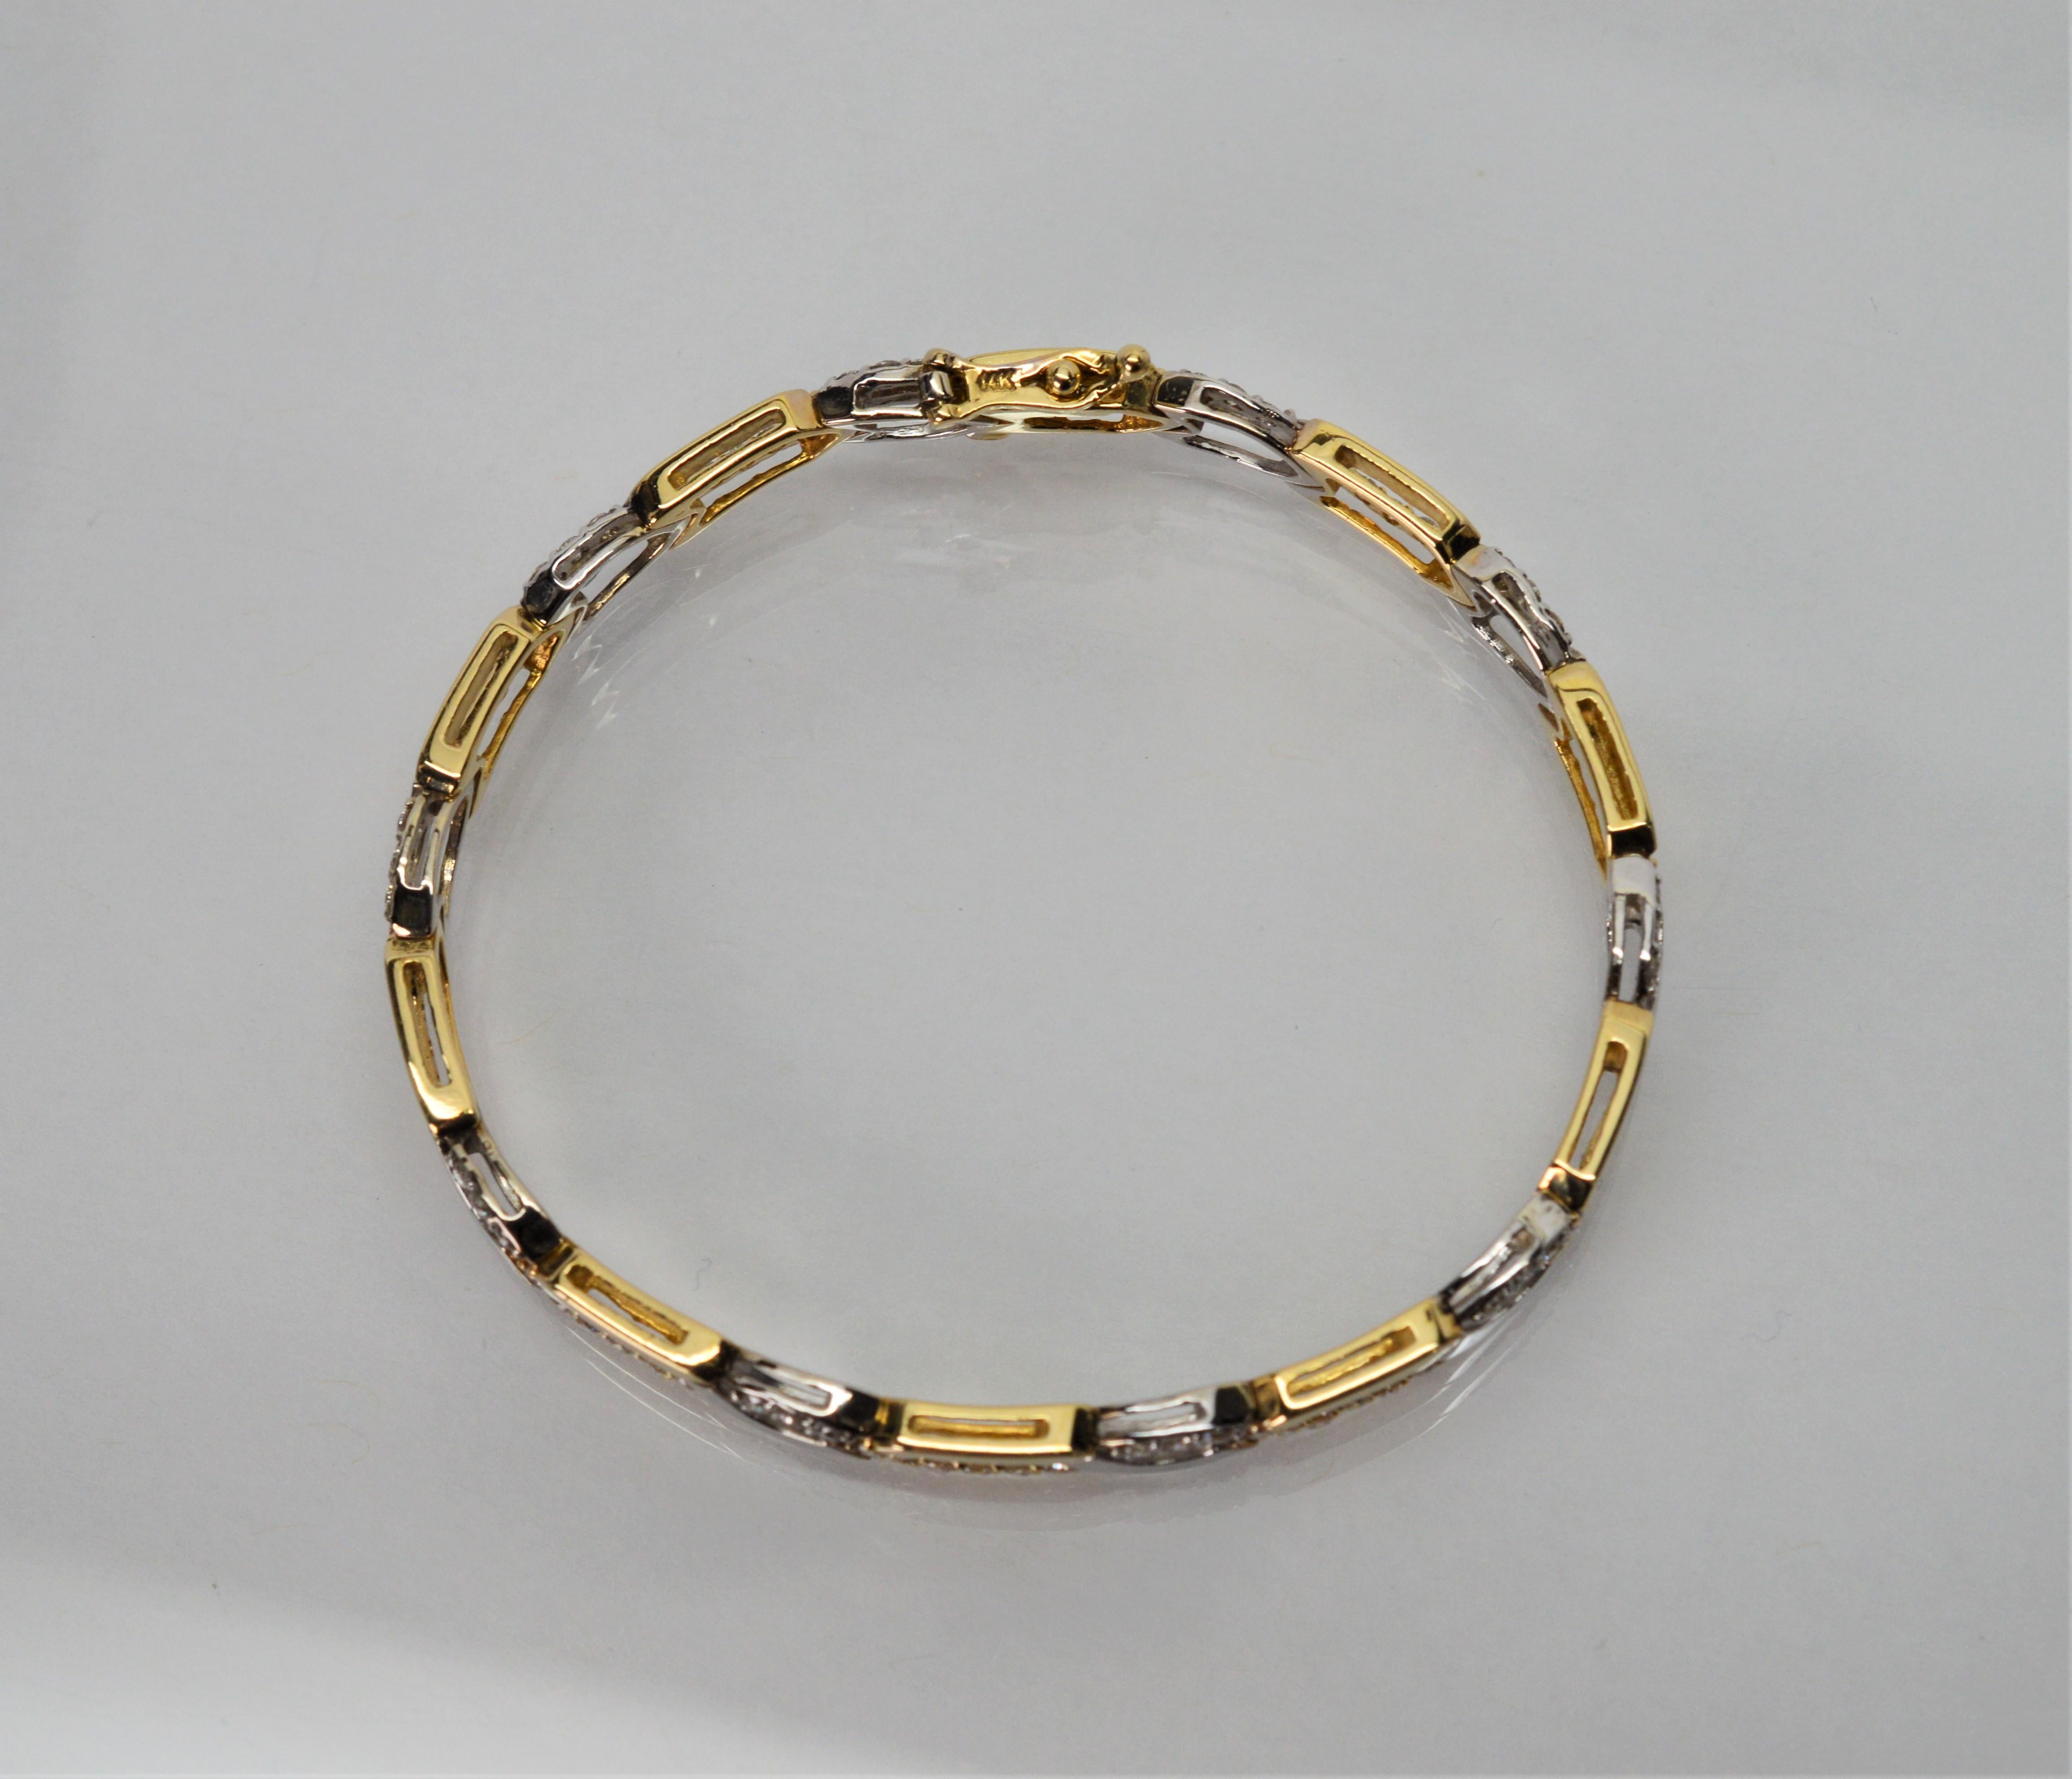 Women's Two-Tone Yellow and White Gold Link Bracelet with Diamond Accents